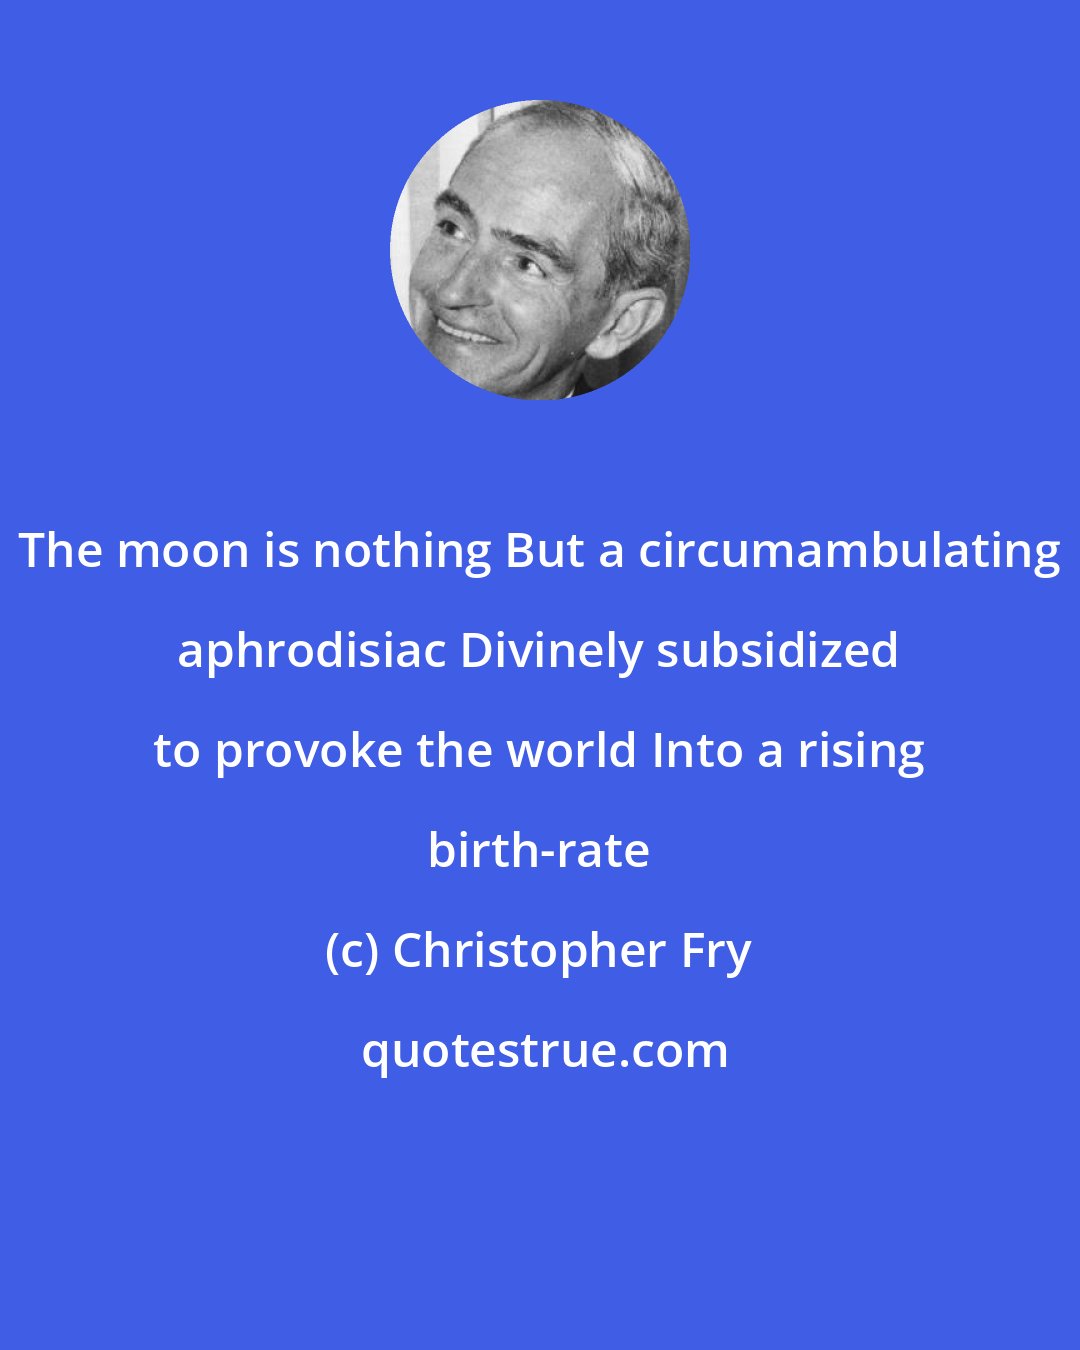 Christopher Fry: The moon is nothing But a circumambulating aphrodisiac Divinely subsidized to provoke the world Into a rising birth-rate